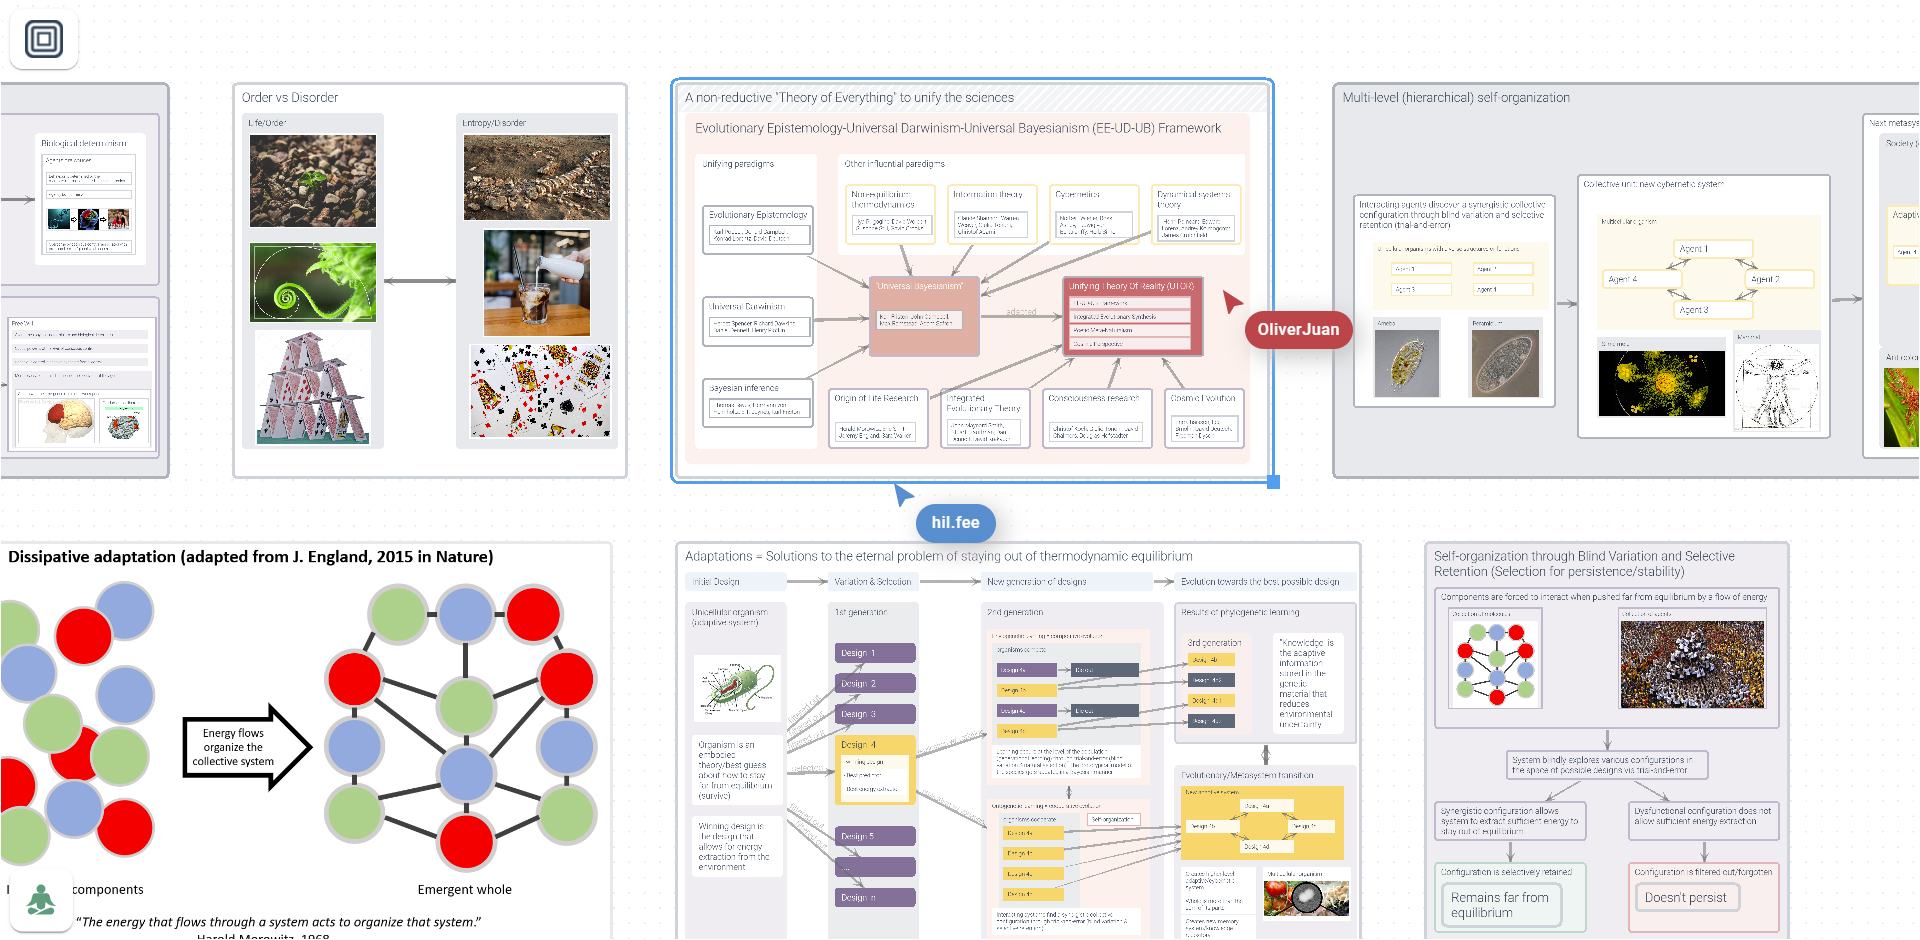 Visual access to scietific literature for both experts and laypeople. Collaborate on research projects together and communicate your findings insightfully with knowledge maps.